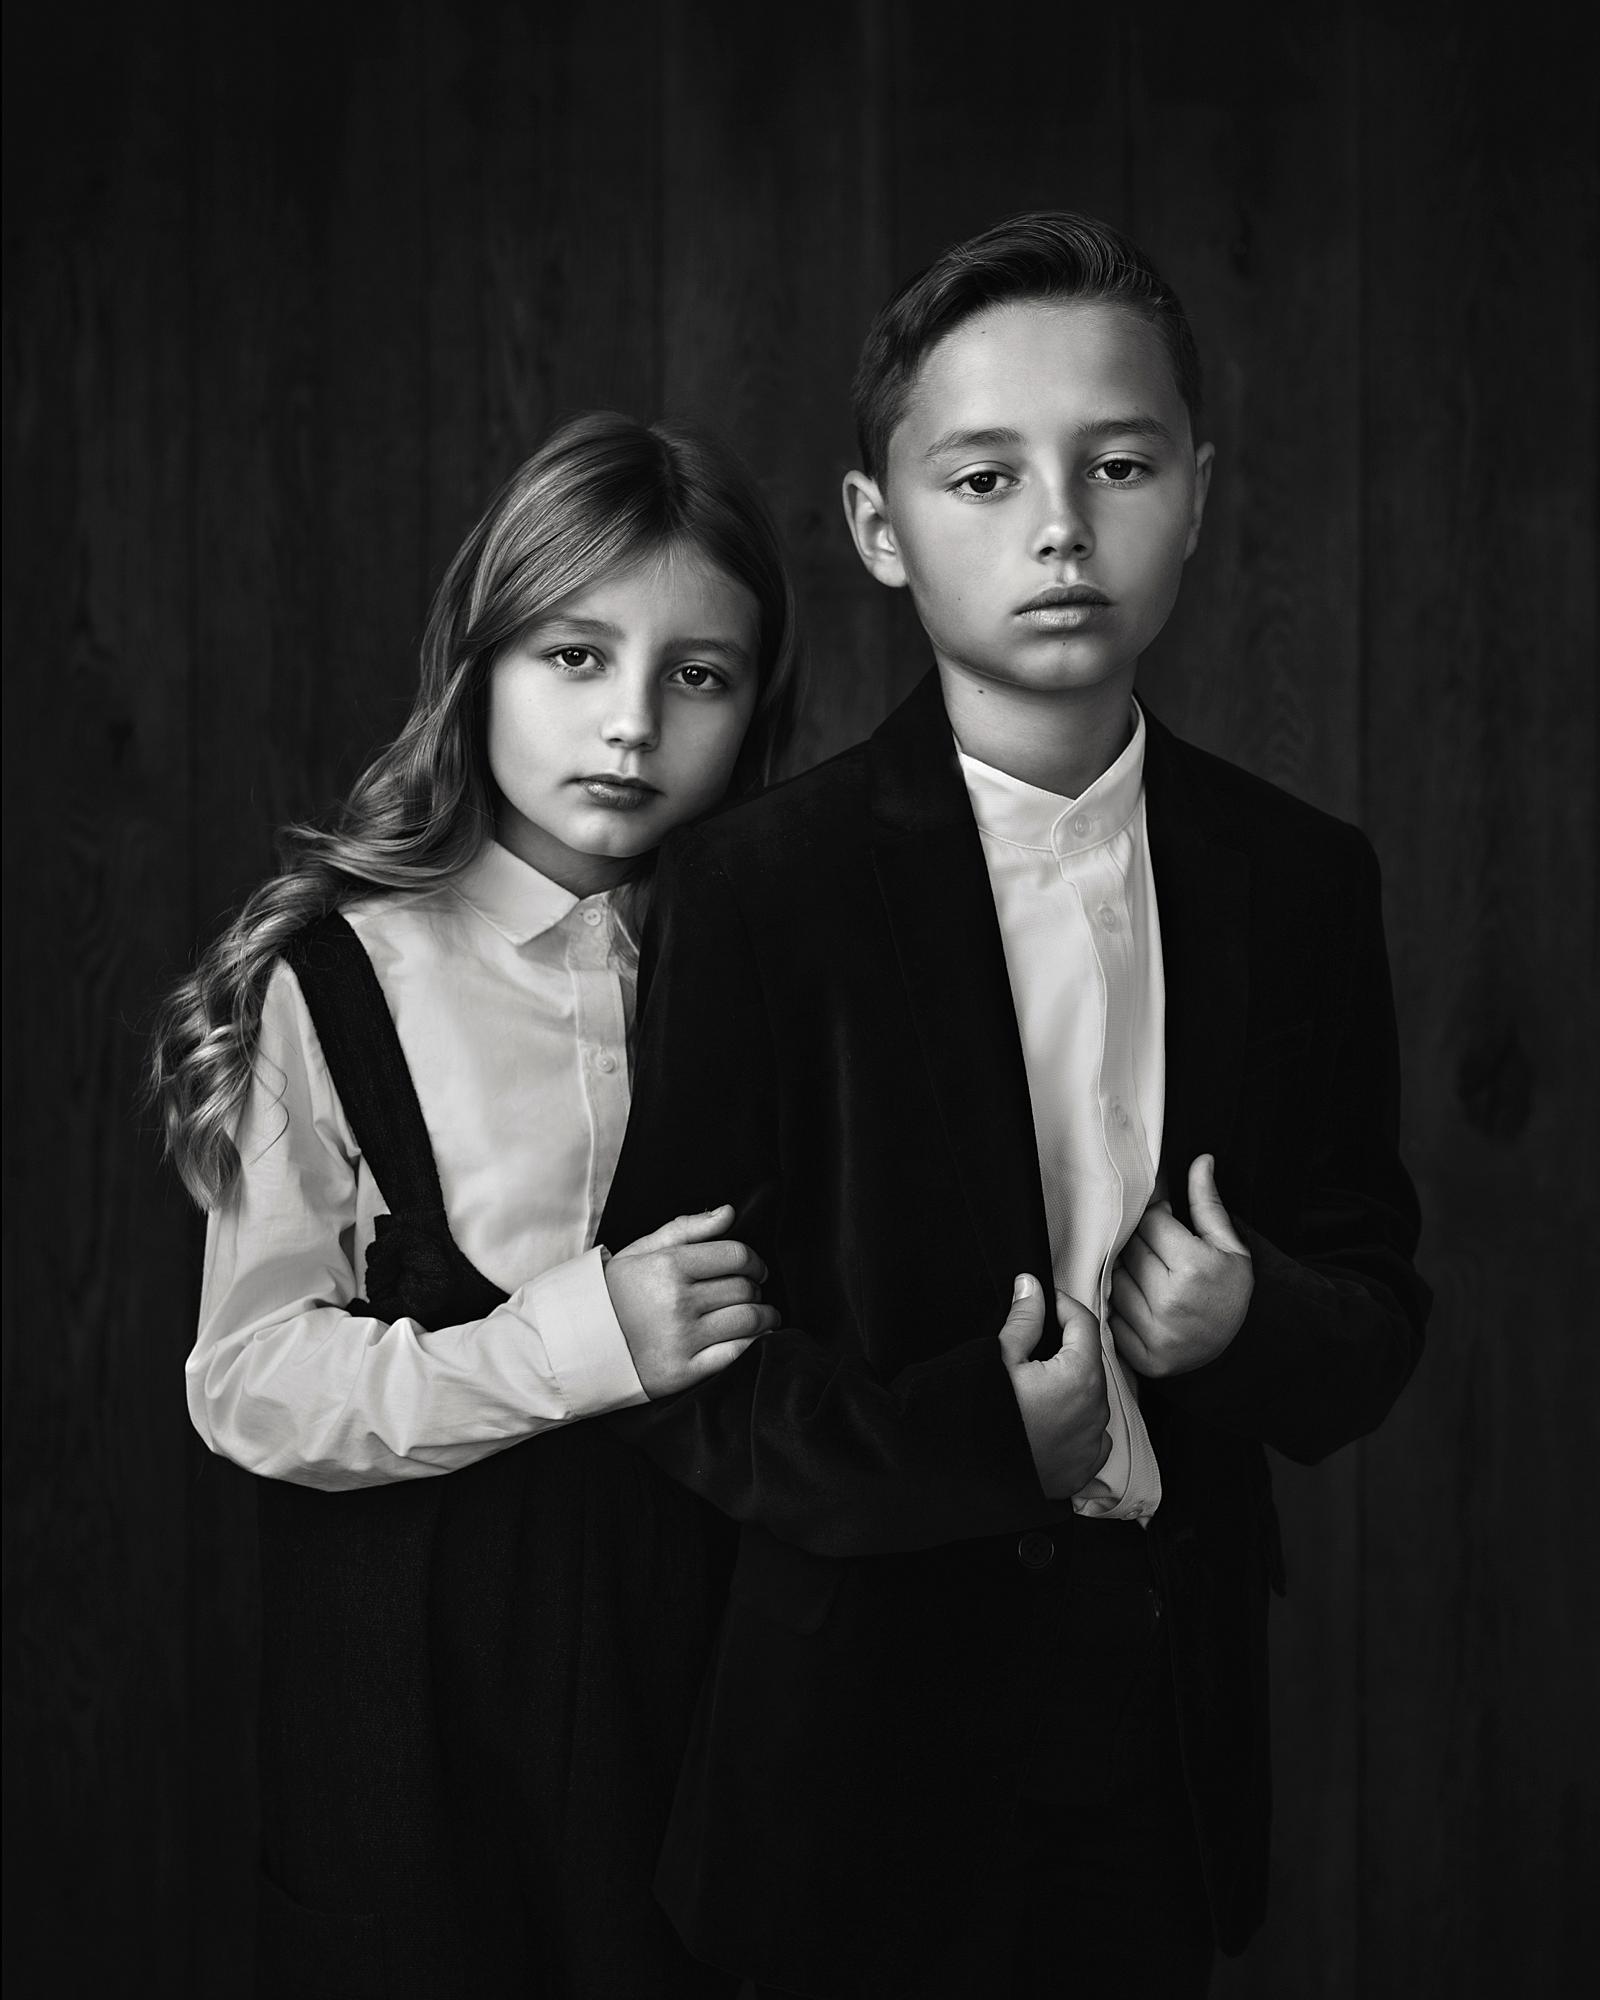 Black and white fine art portrait of a Brother and Sister in vintage clothes